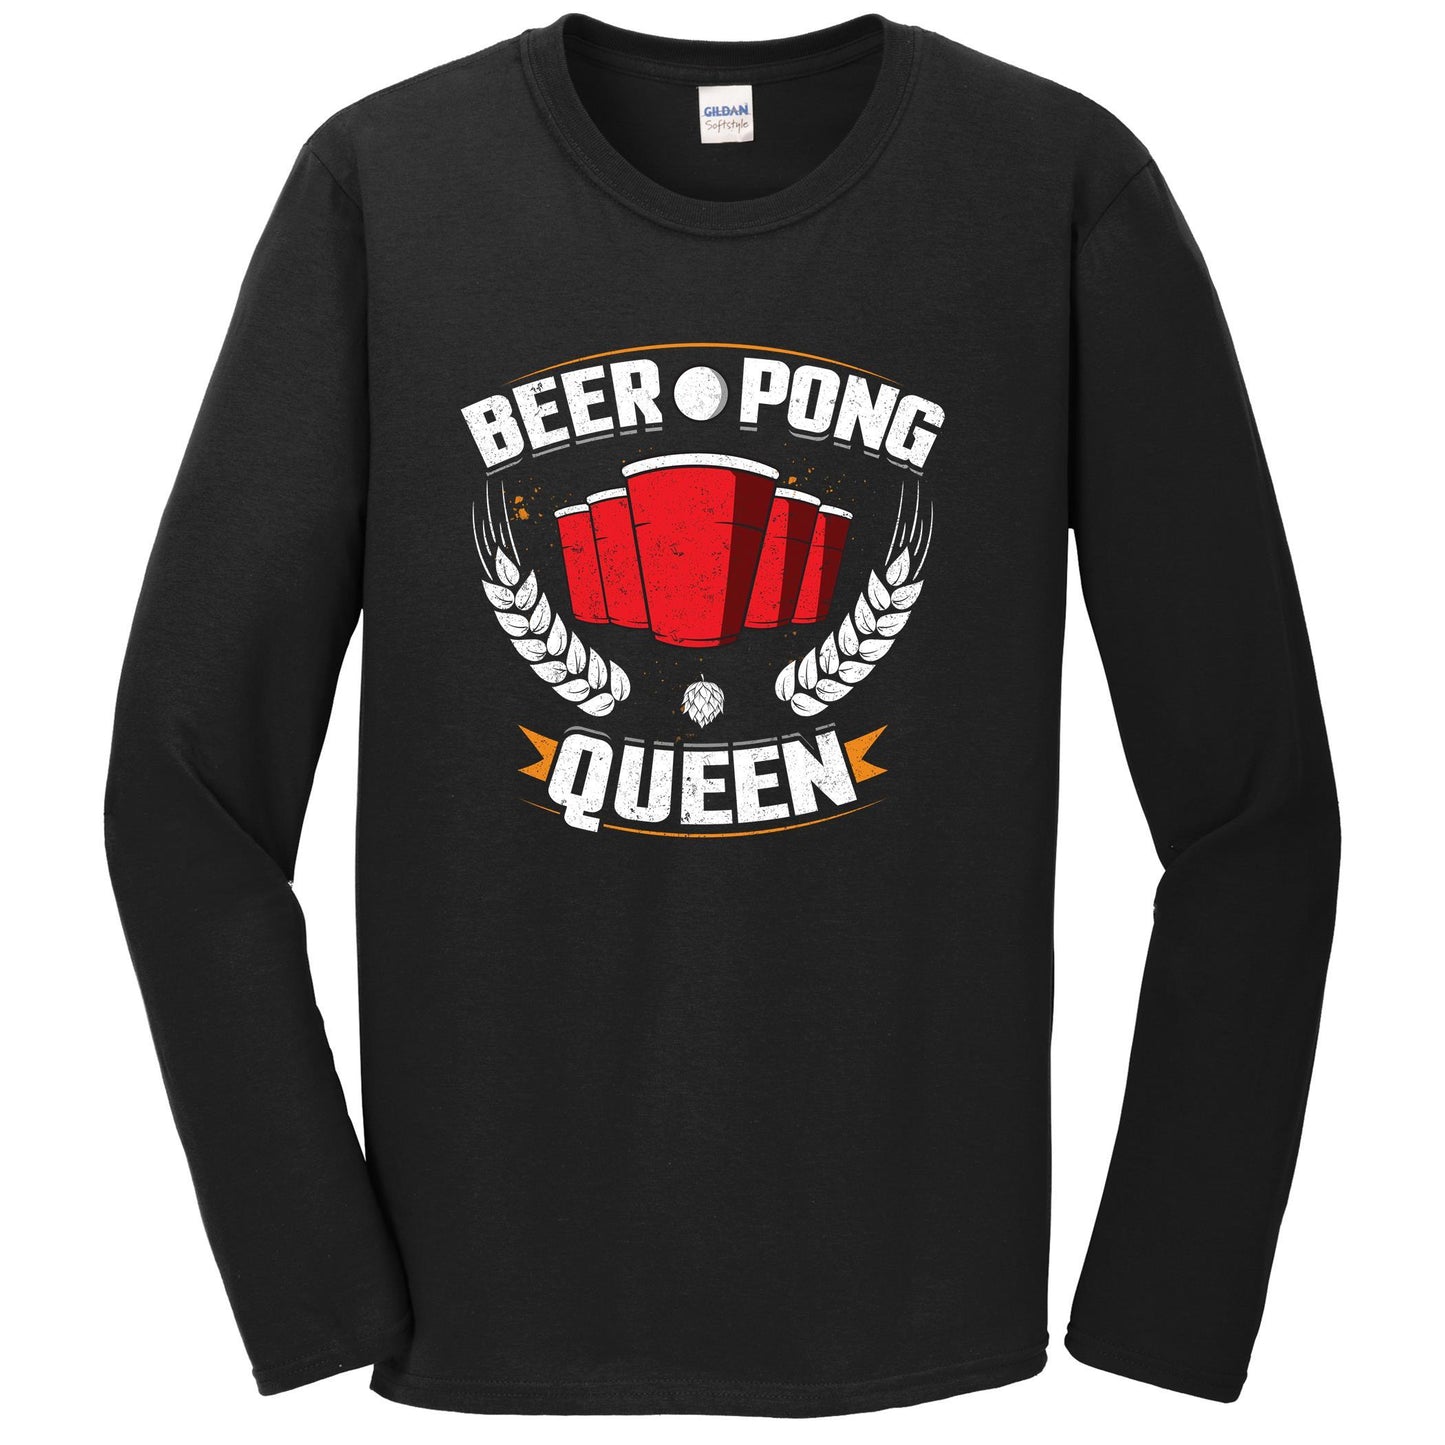 Beer Pong Queen Funny Drinking Long Sleeve Shirt